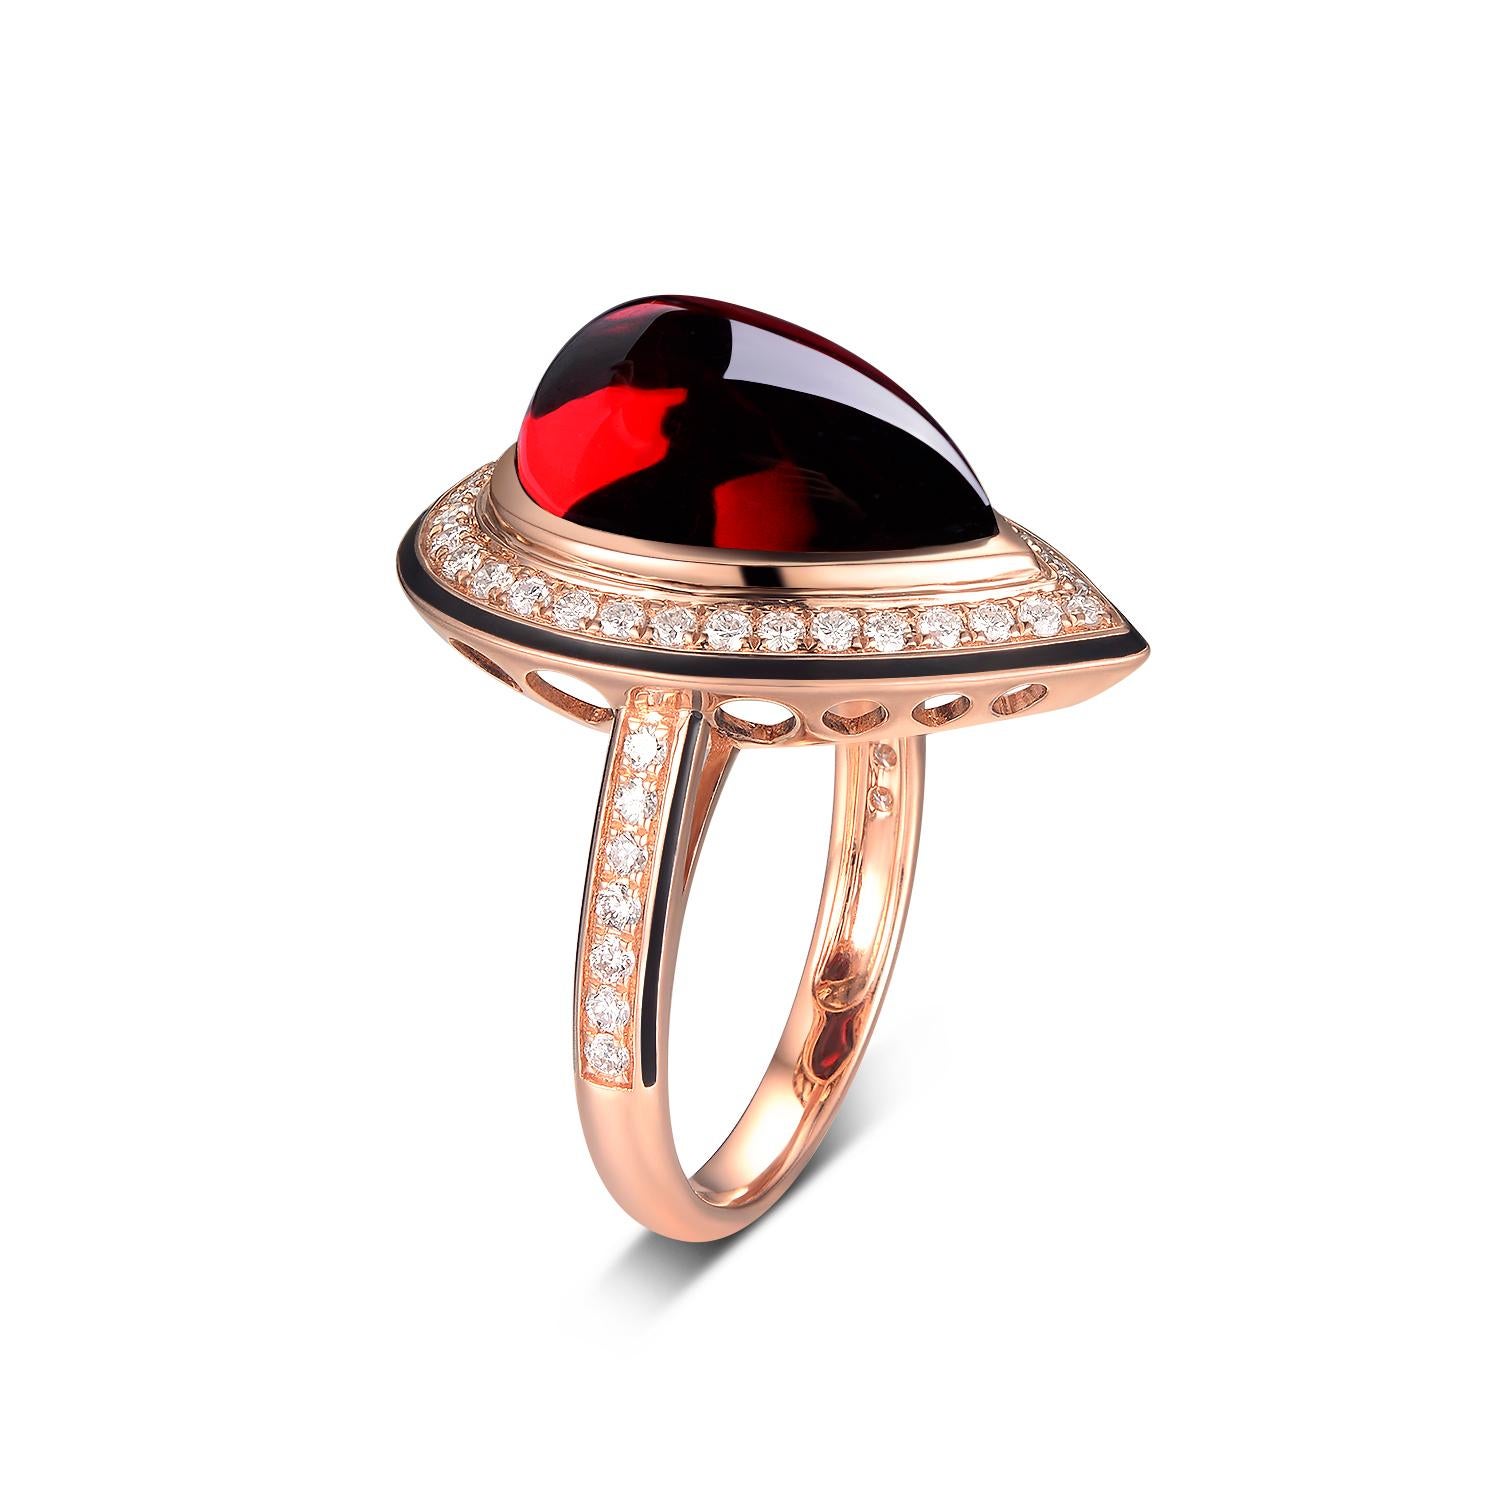 This ring features a 9.45 carats pear shape cabochon red garnet set in bezel setting, assent with 0.48 carat of round diamond. The diamond halo is then outlined by black enamel. This piece is crafted in 18 karat rose gold.

US 6.5
Red Garnet 9.45